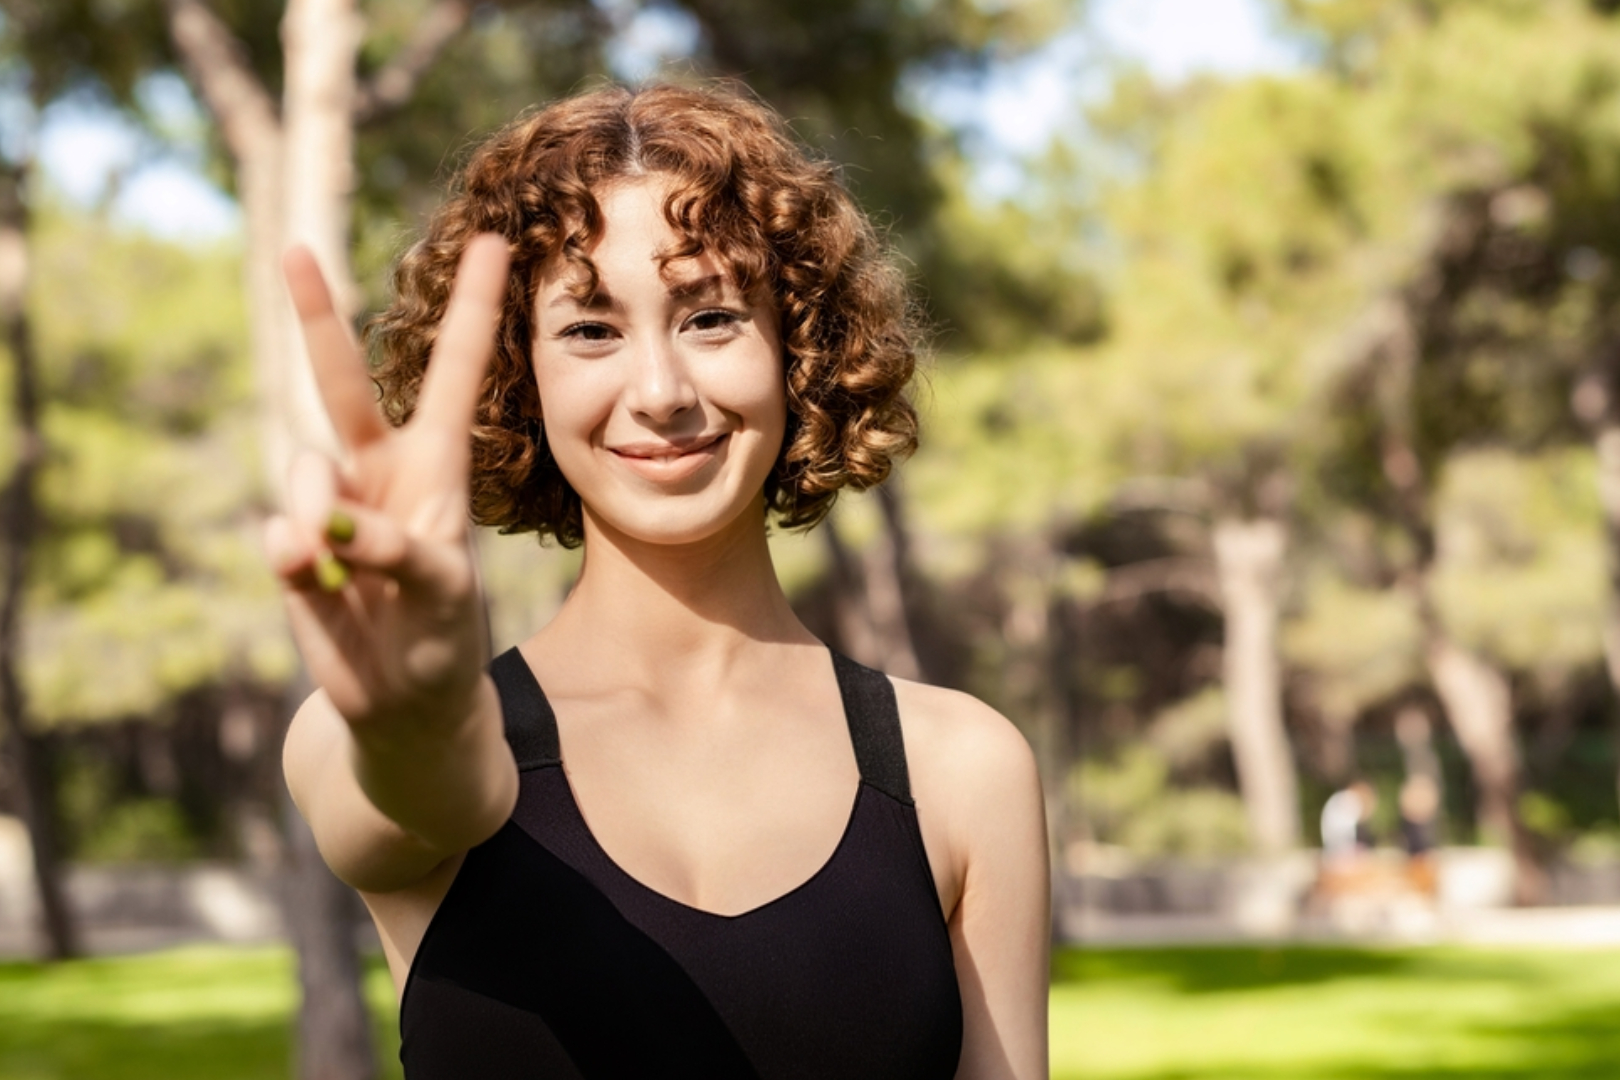 A young woman stands outside and holds her hand up in a peace symbol